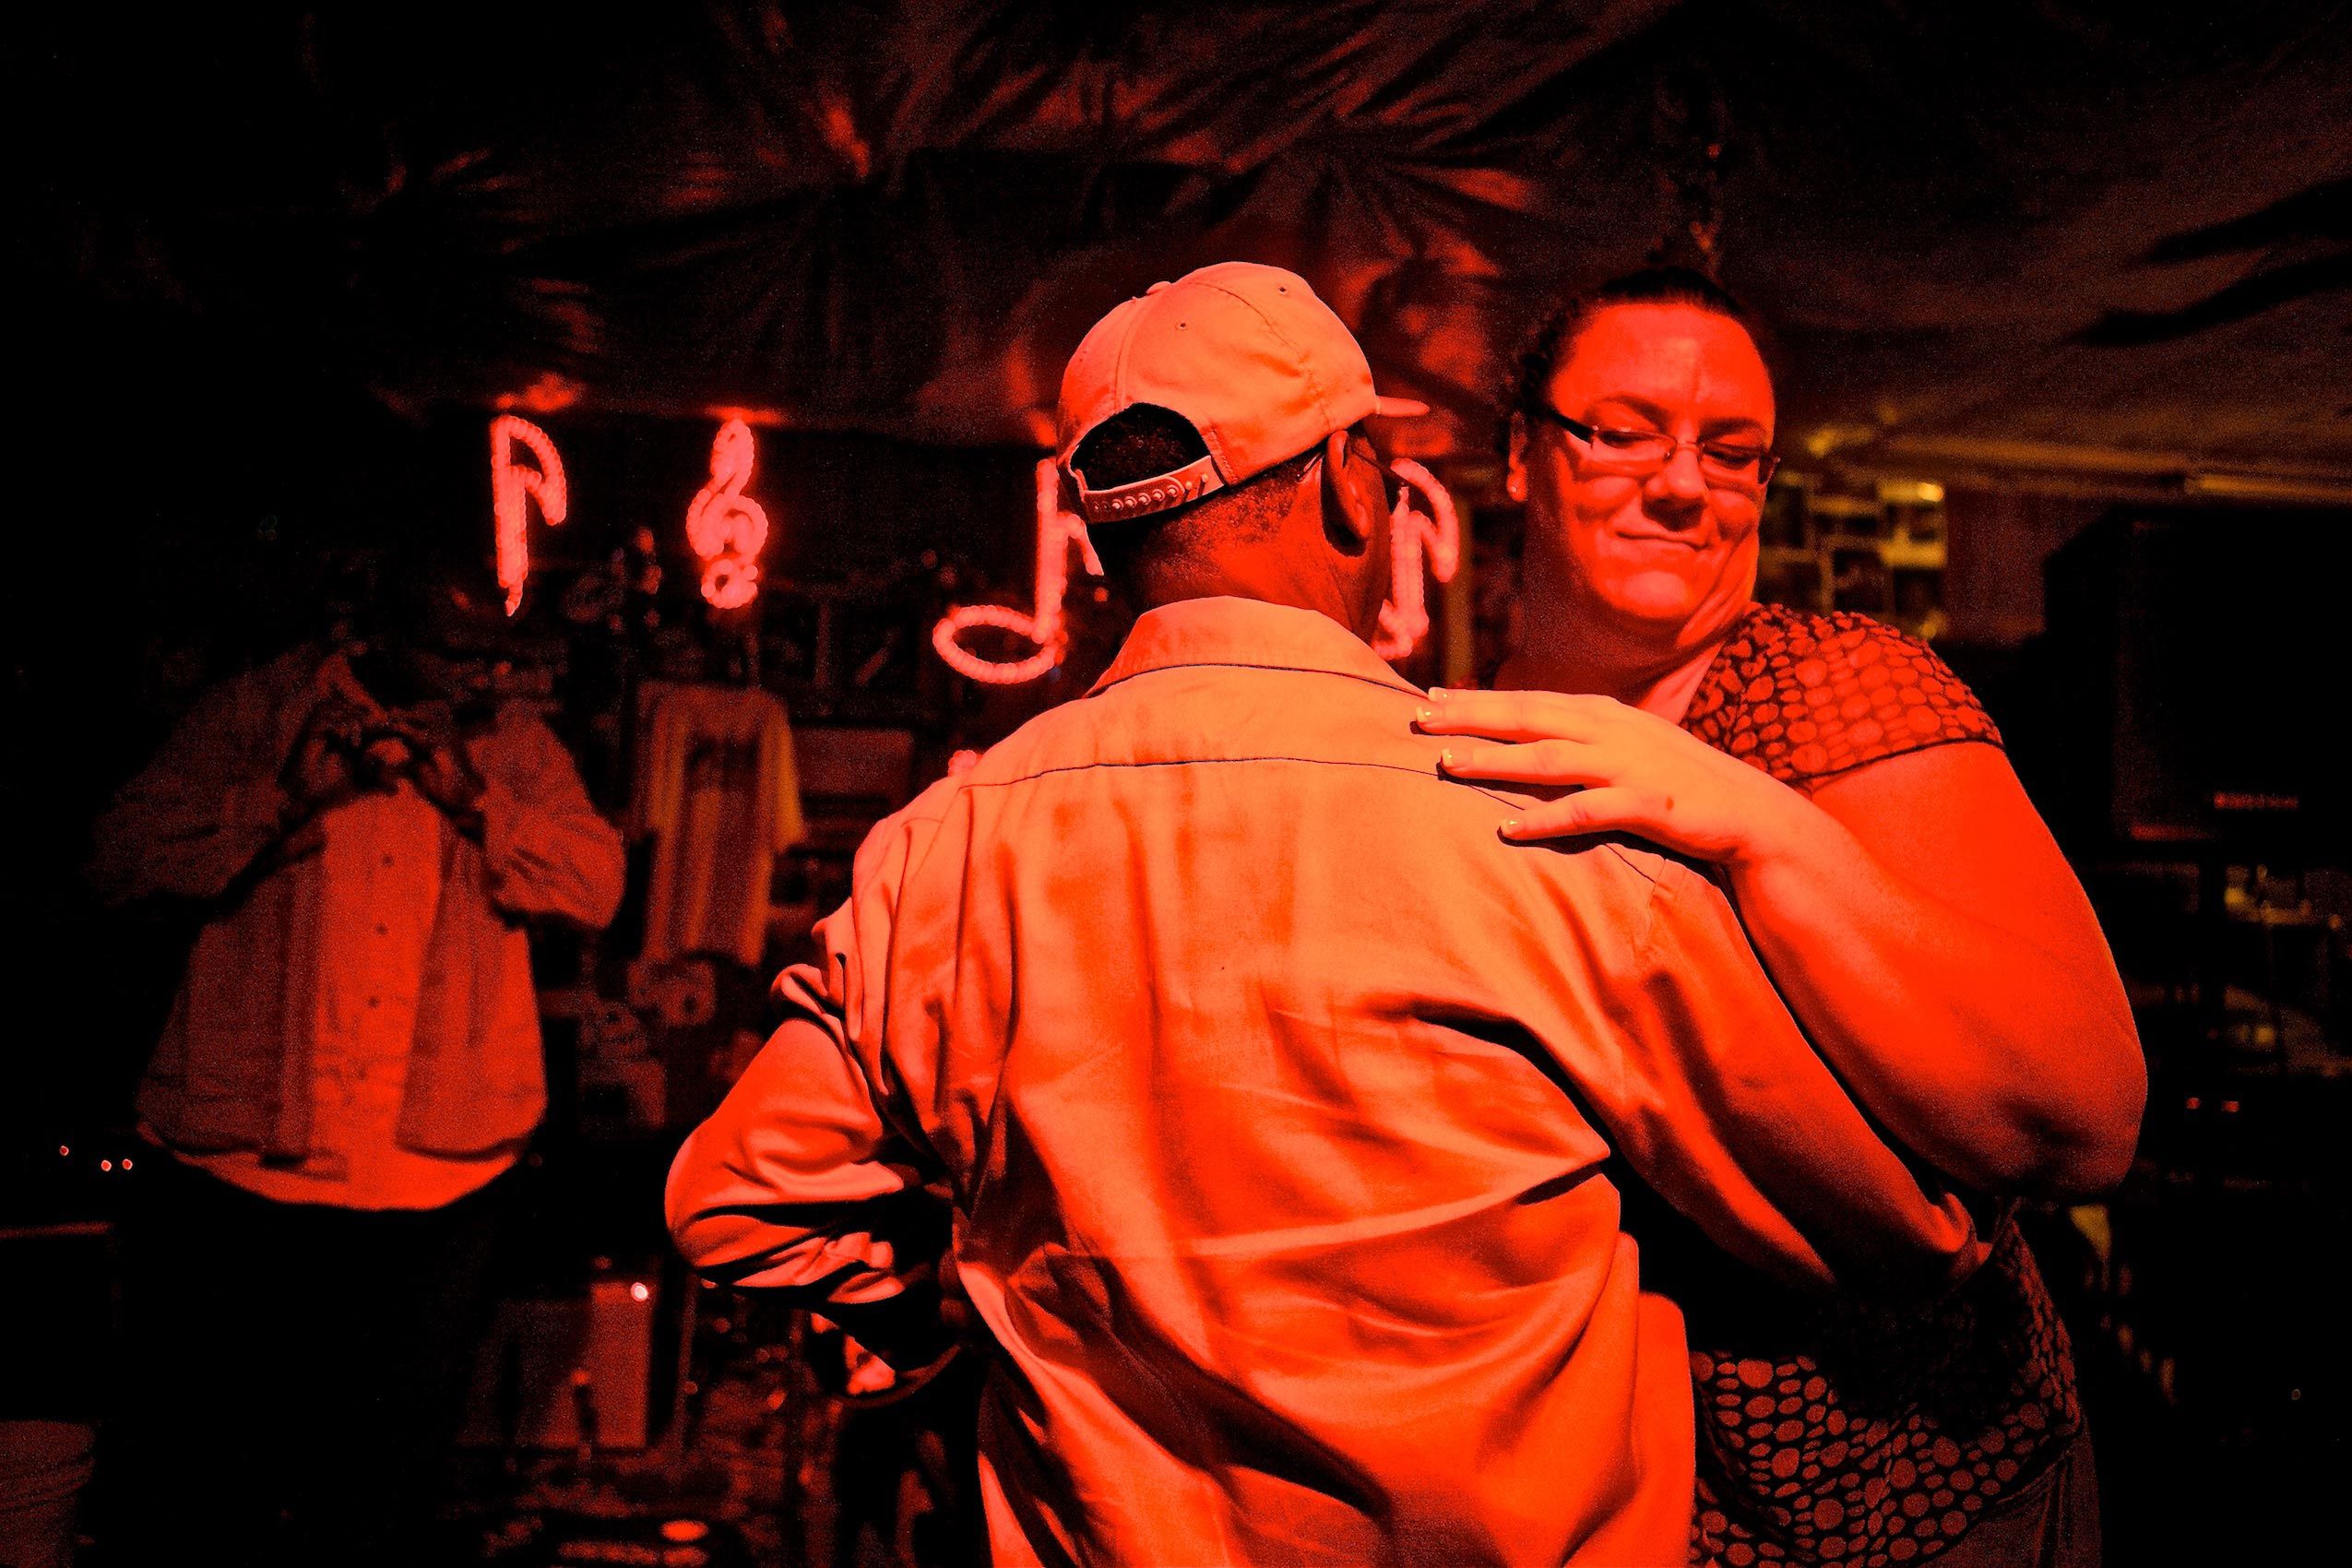 Couple Dancing at Red's Lounge Juke Joint